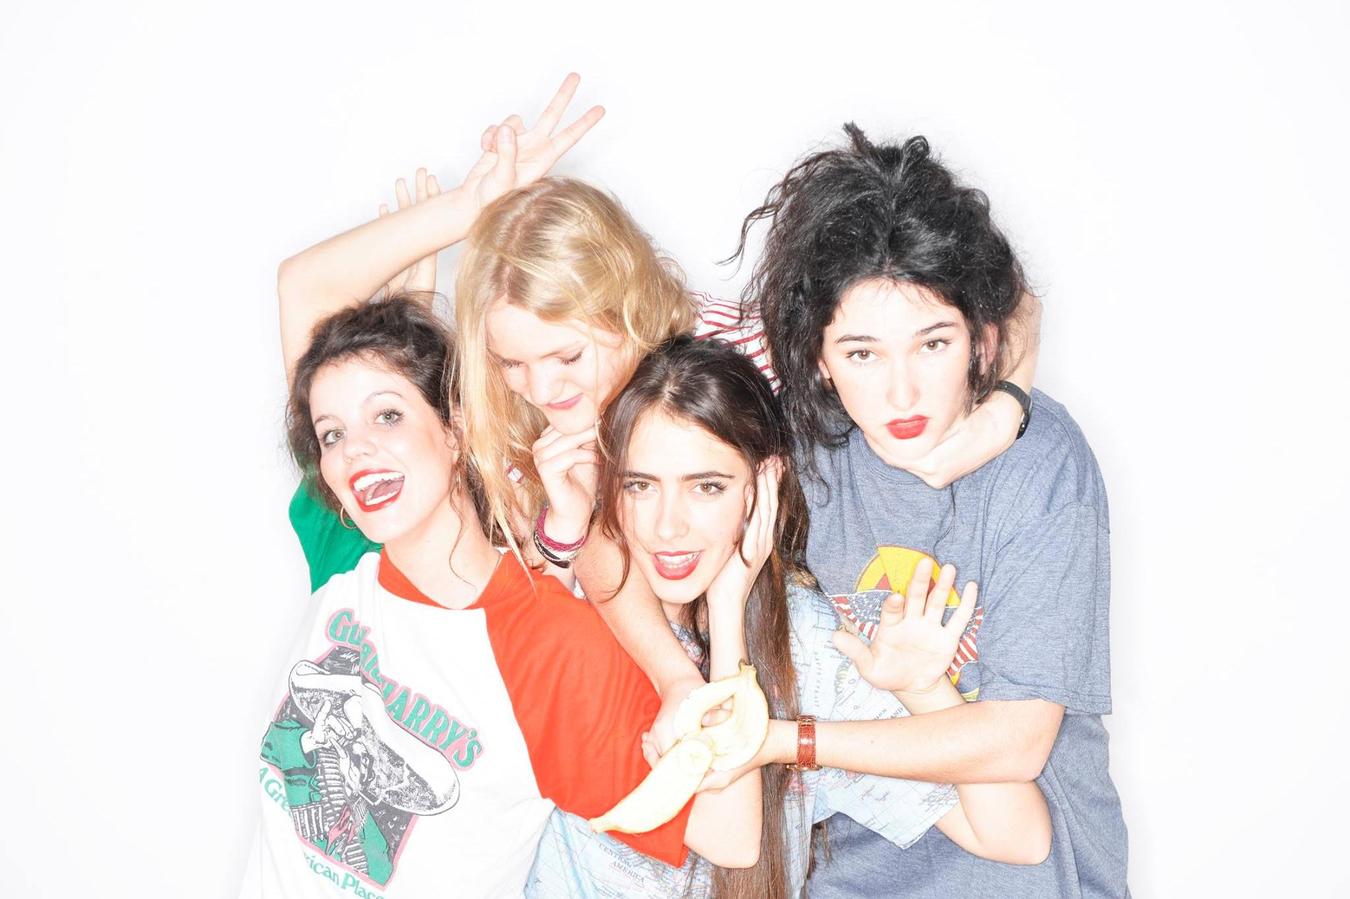 Hinds – Leave Me Alone